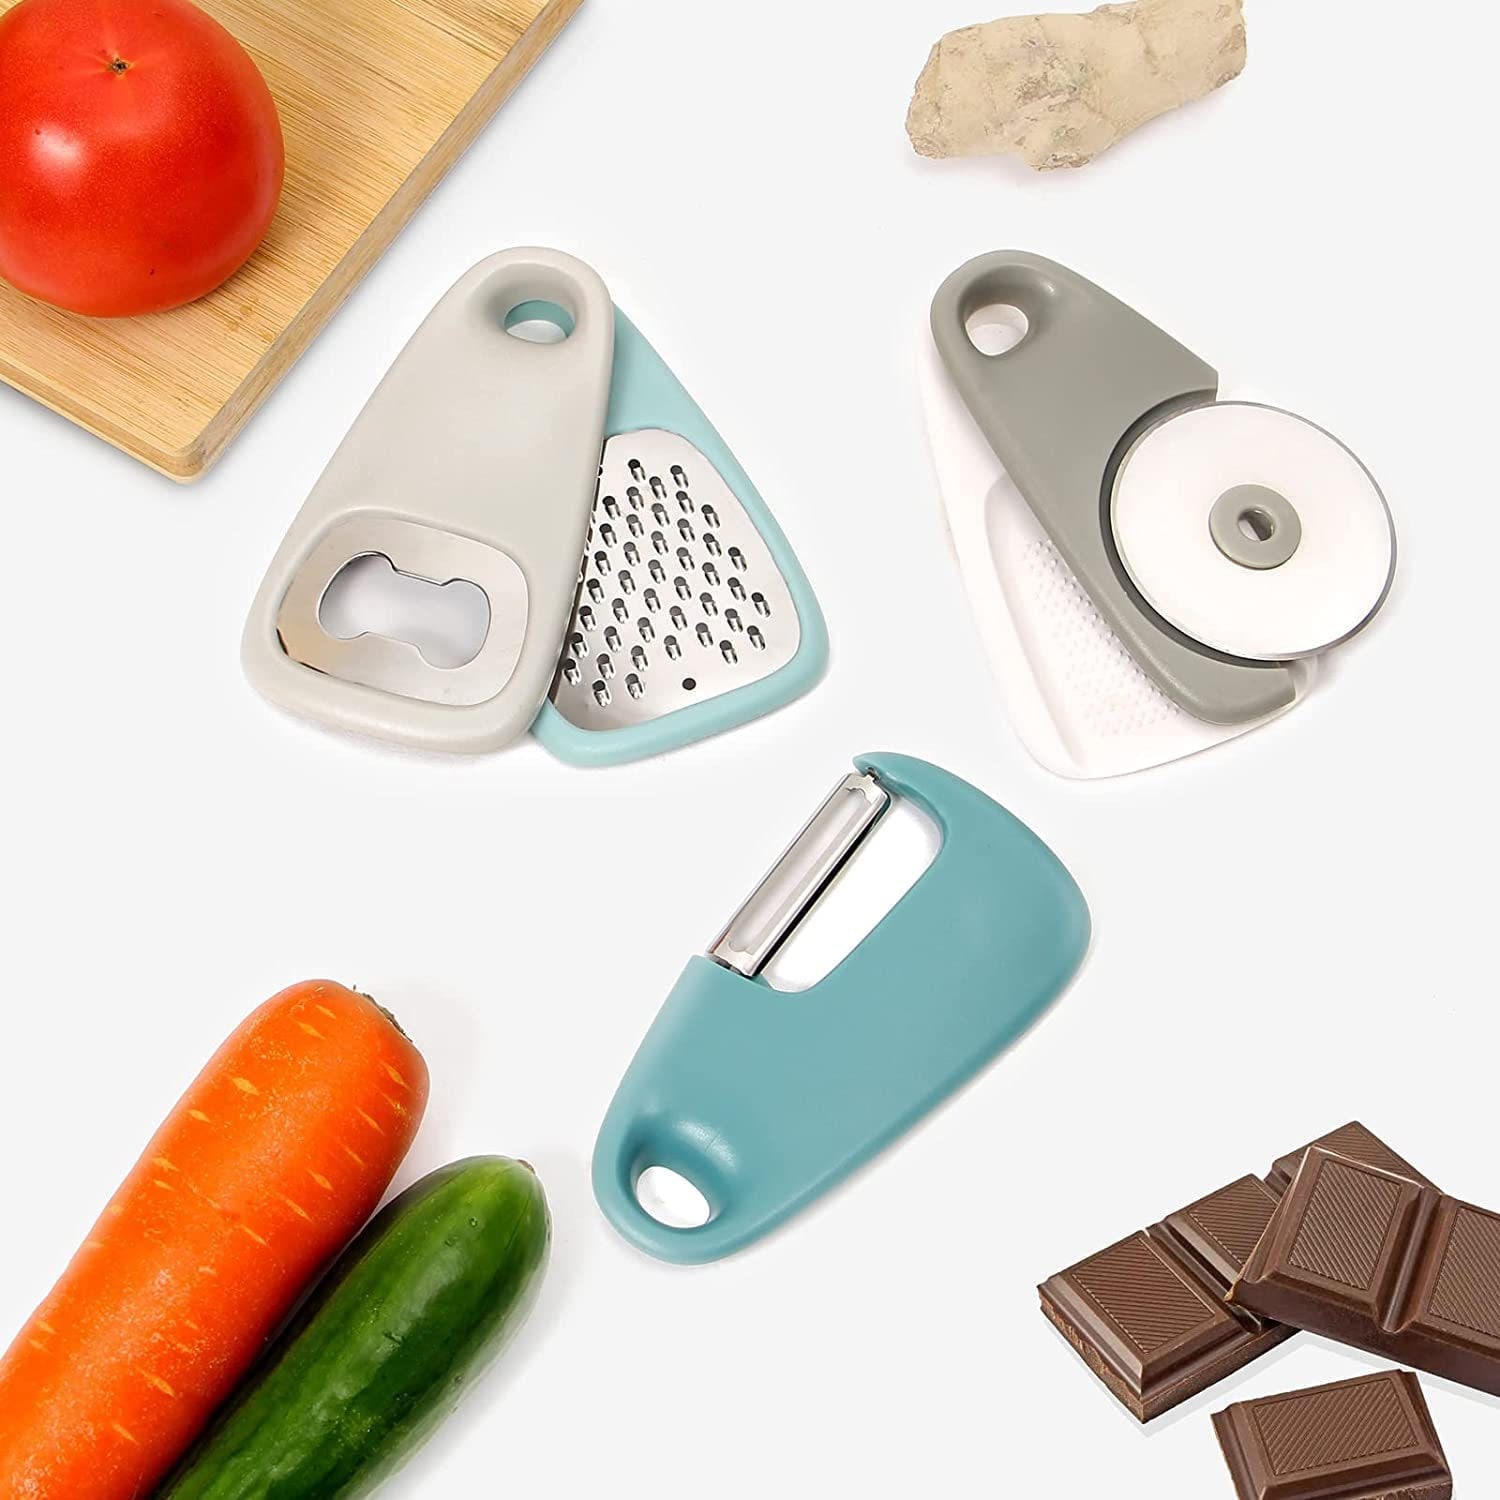 5 Pieces Kitchen Gadgets Set - Space Saving Cooking Tools Accessories Cheese Chocolate Grater, Fruit Vegetable Peeler, Bottle Opener, Pizza Cutter, Bu